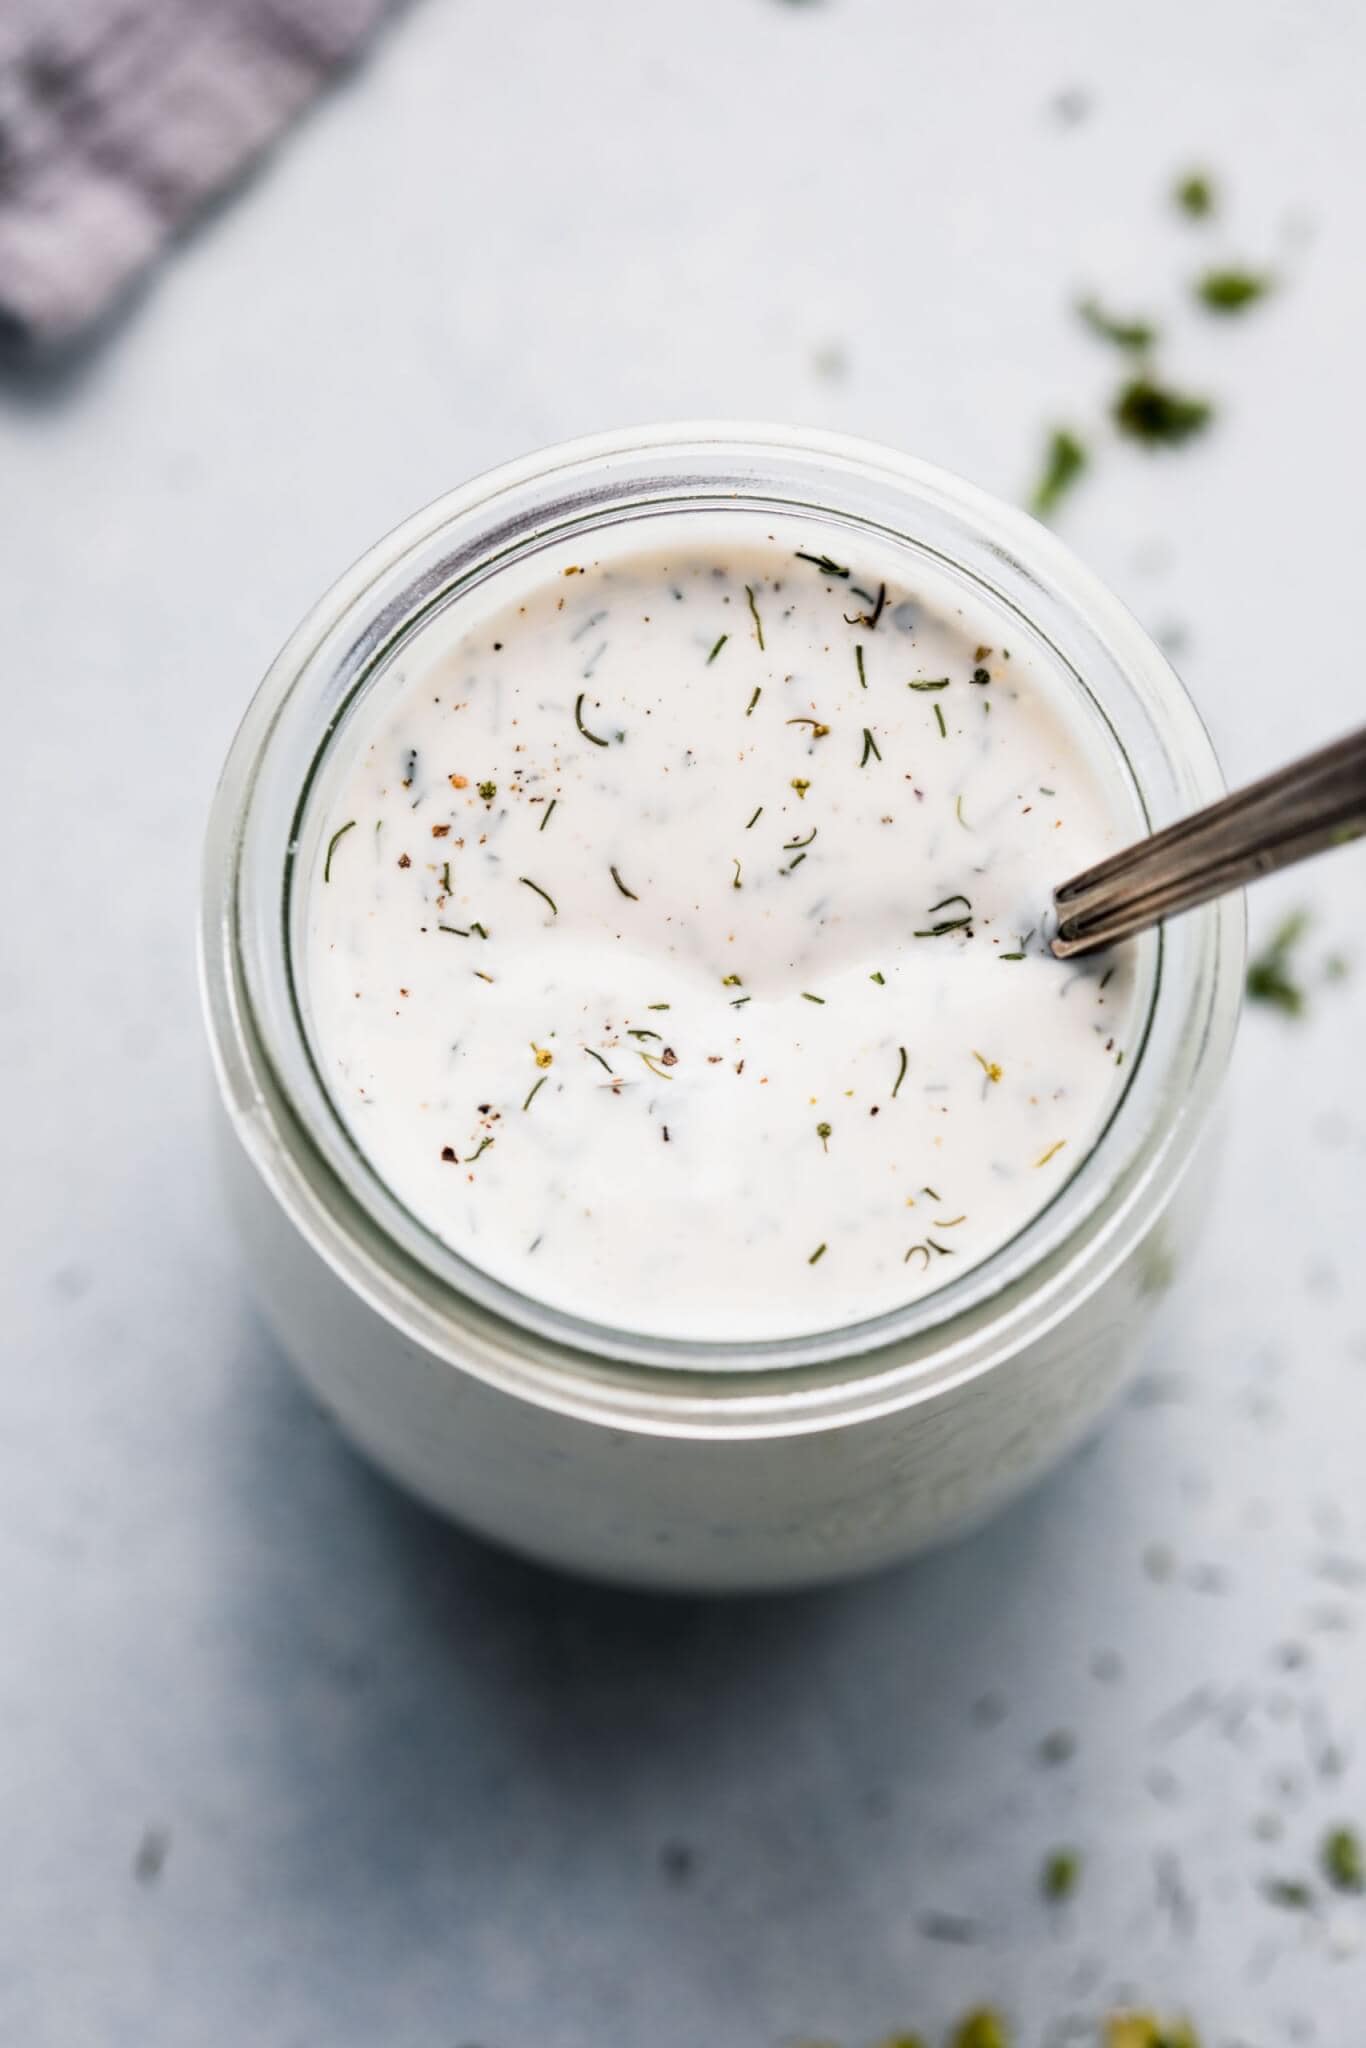 Ranch dressing in small glass jar with spoon.